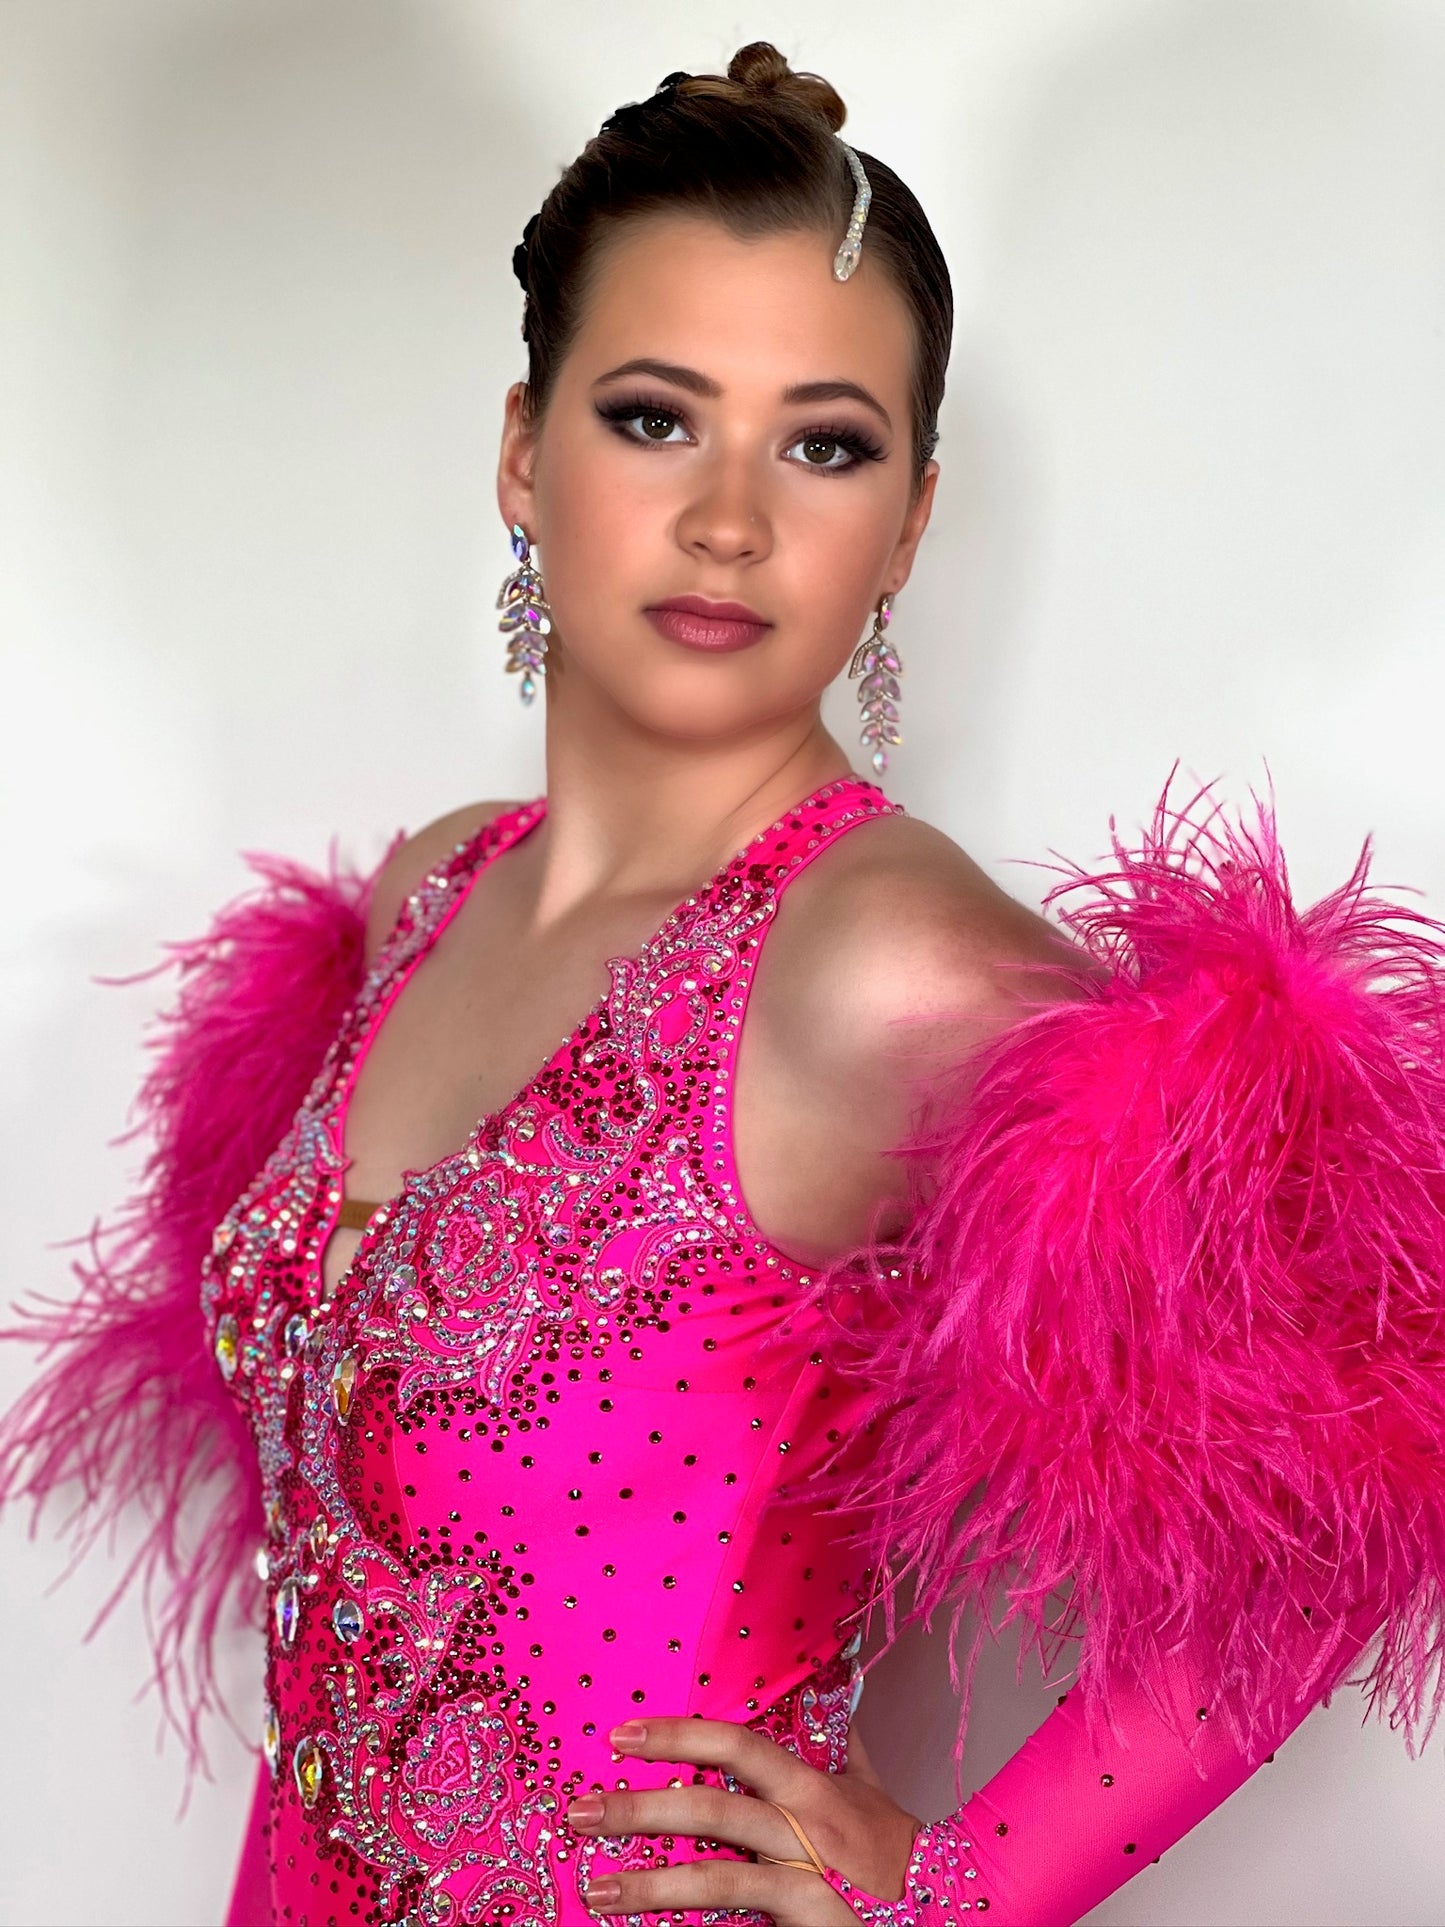 139 Stunning Bright Pink Ballroom dress. Comes with long pink mesh fingerloop gloves and Fluffy ostrich feather cuffs. Decorative back. Stoned in AB, Rose & Light Rose